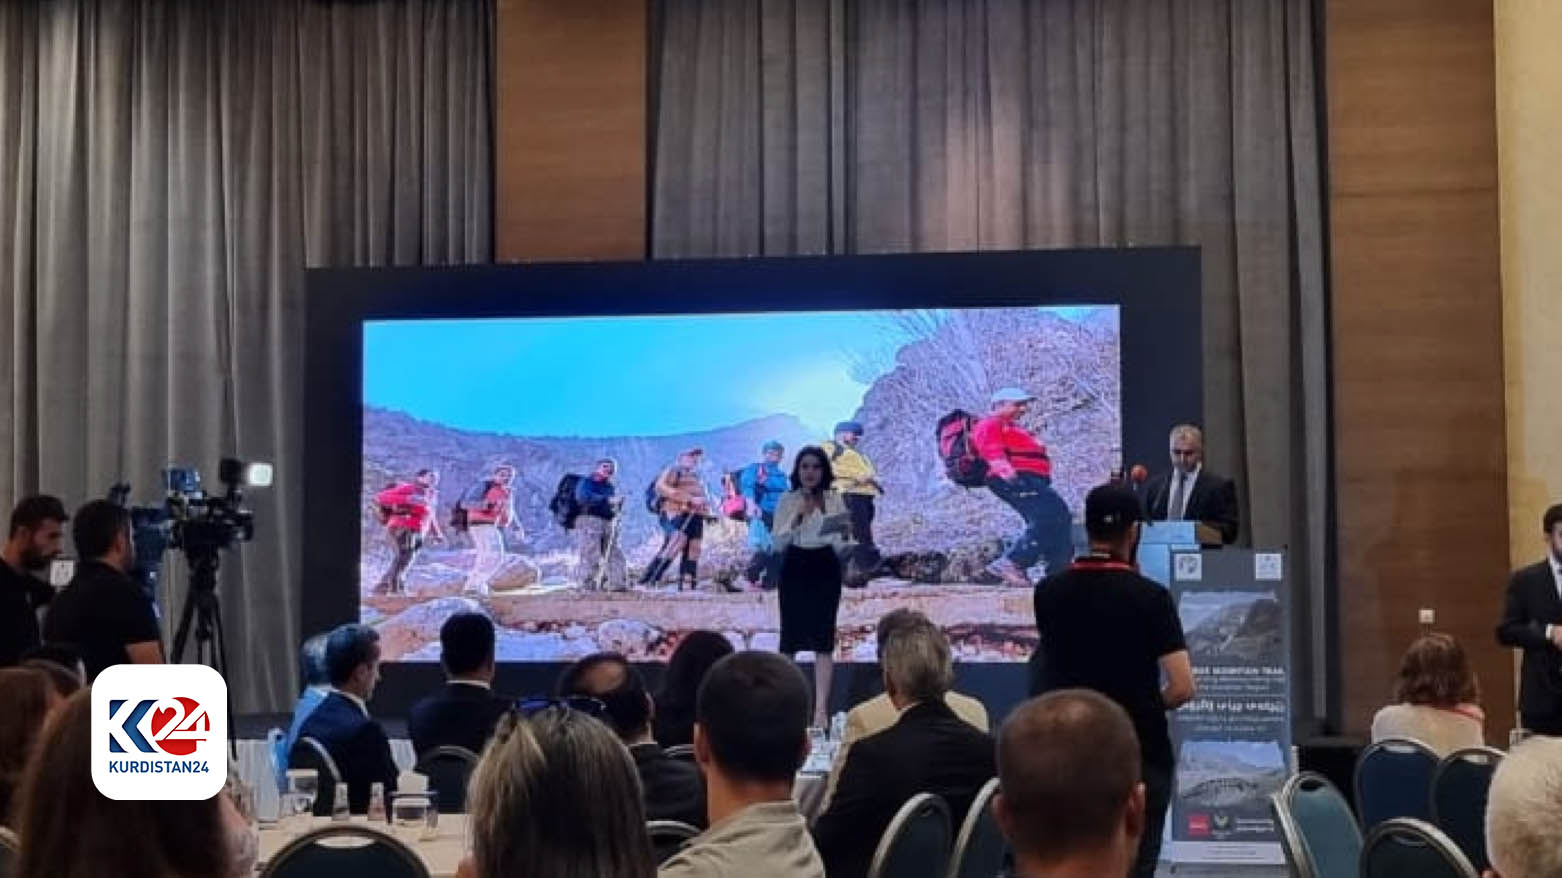 On Monday, the official launch event was held for the Zagros Mountain Trail, Oct. 30 (Photo: Wladimir van Wilgenburg/Kurdistan 24).